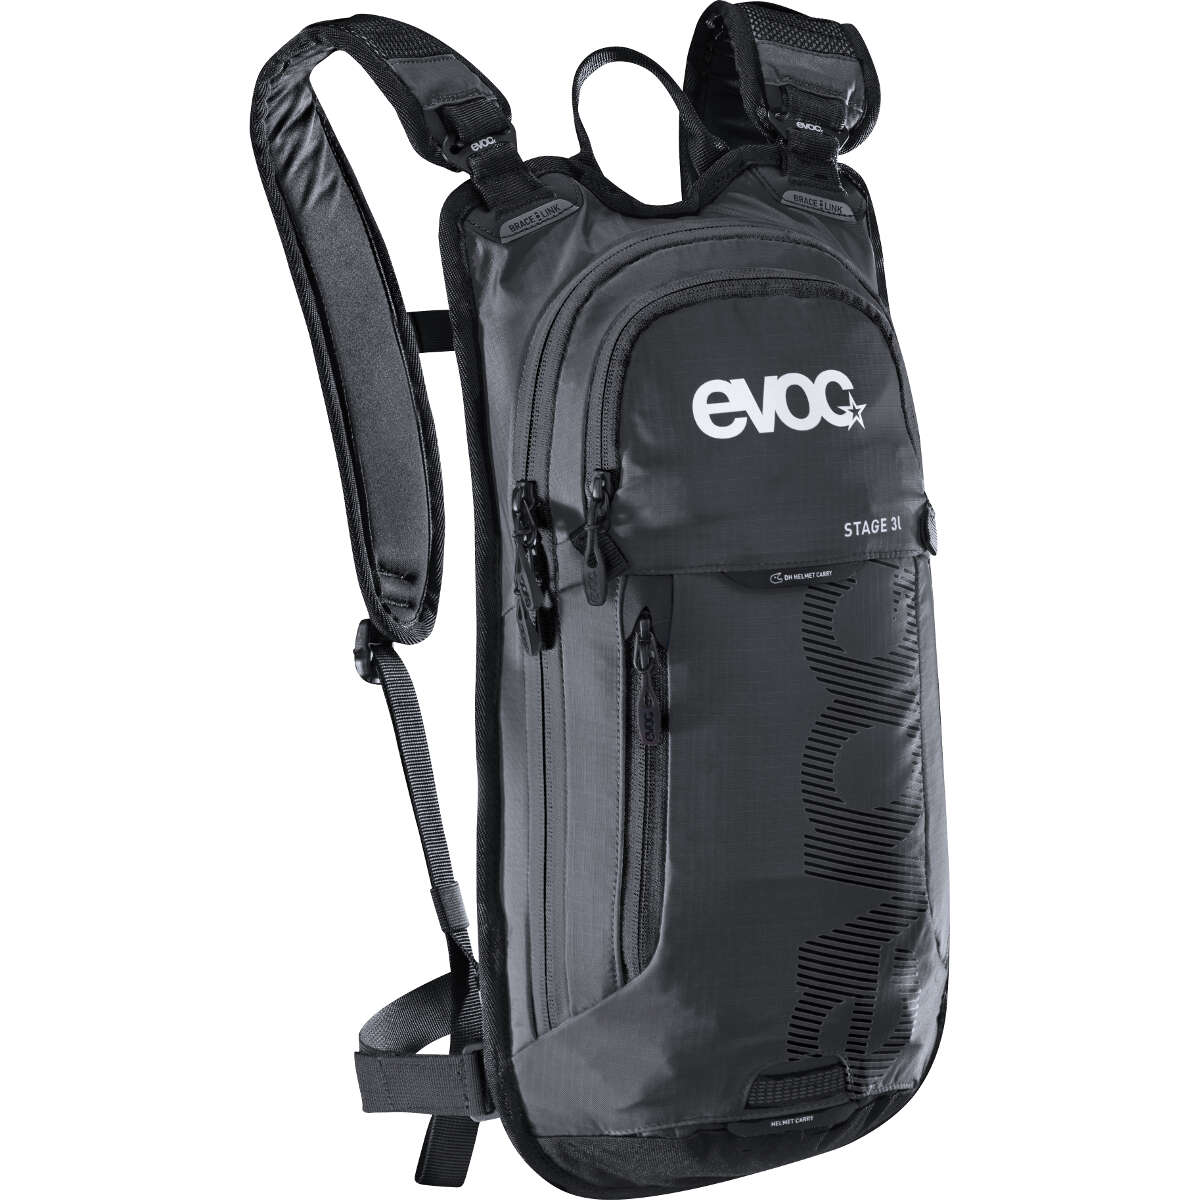 Evoc Backpack with Hydration System Compartment Stage Black, 3 Liter